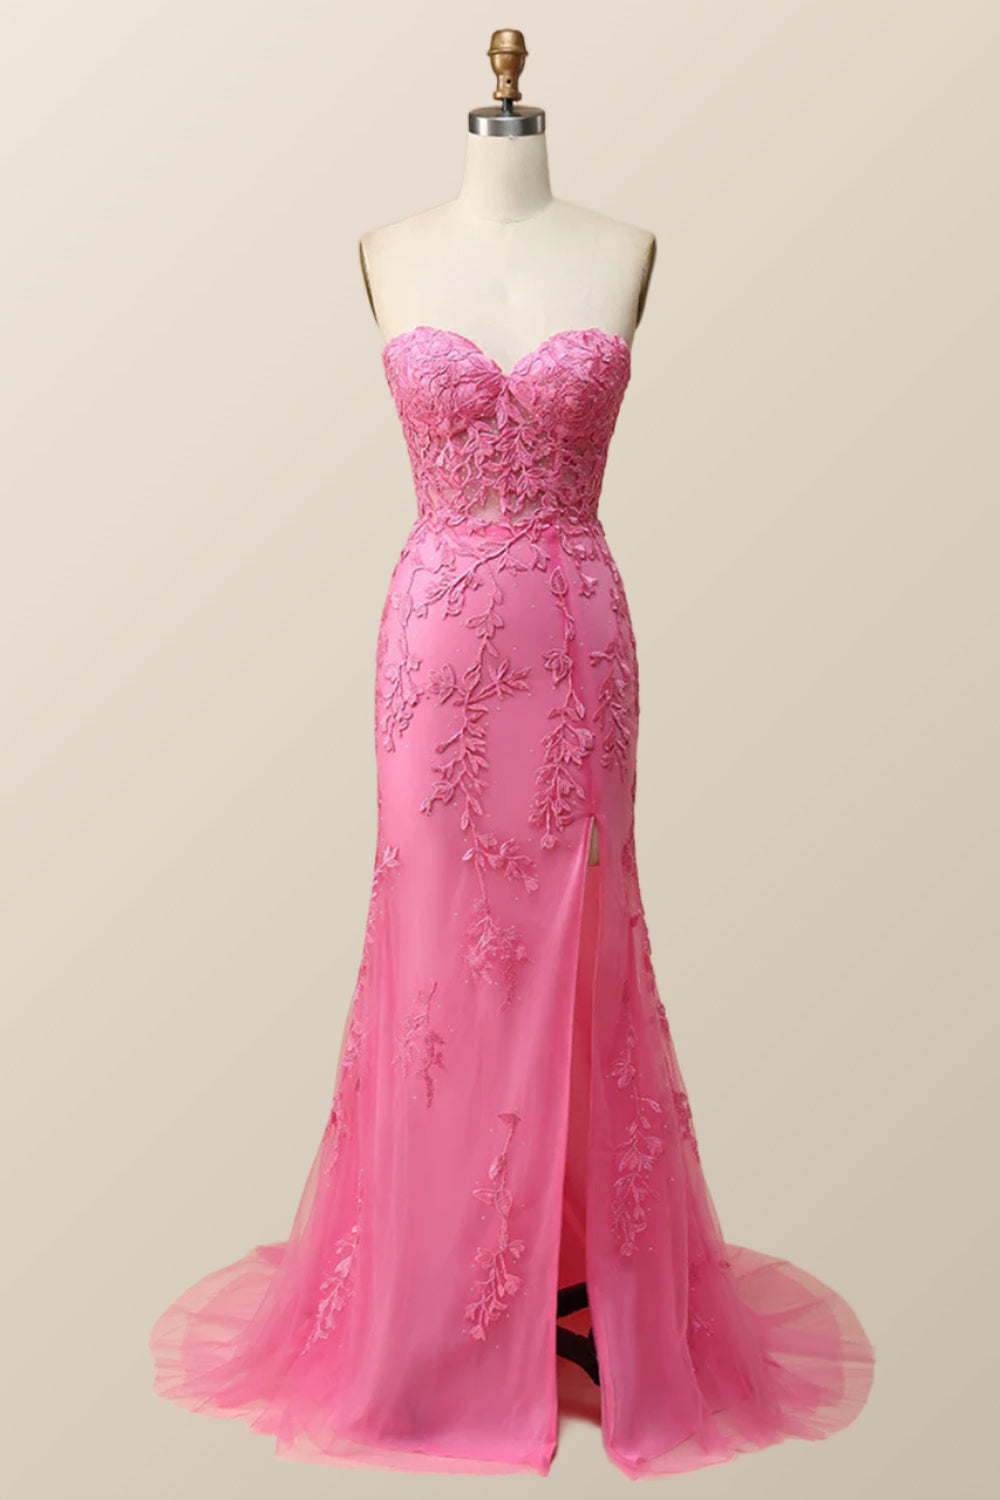 Strapless Hot Pink Lace Mermaid Long Prom Dress